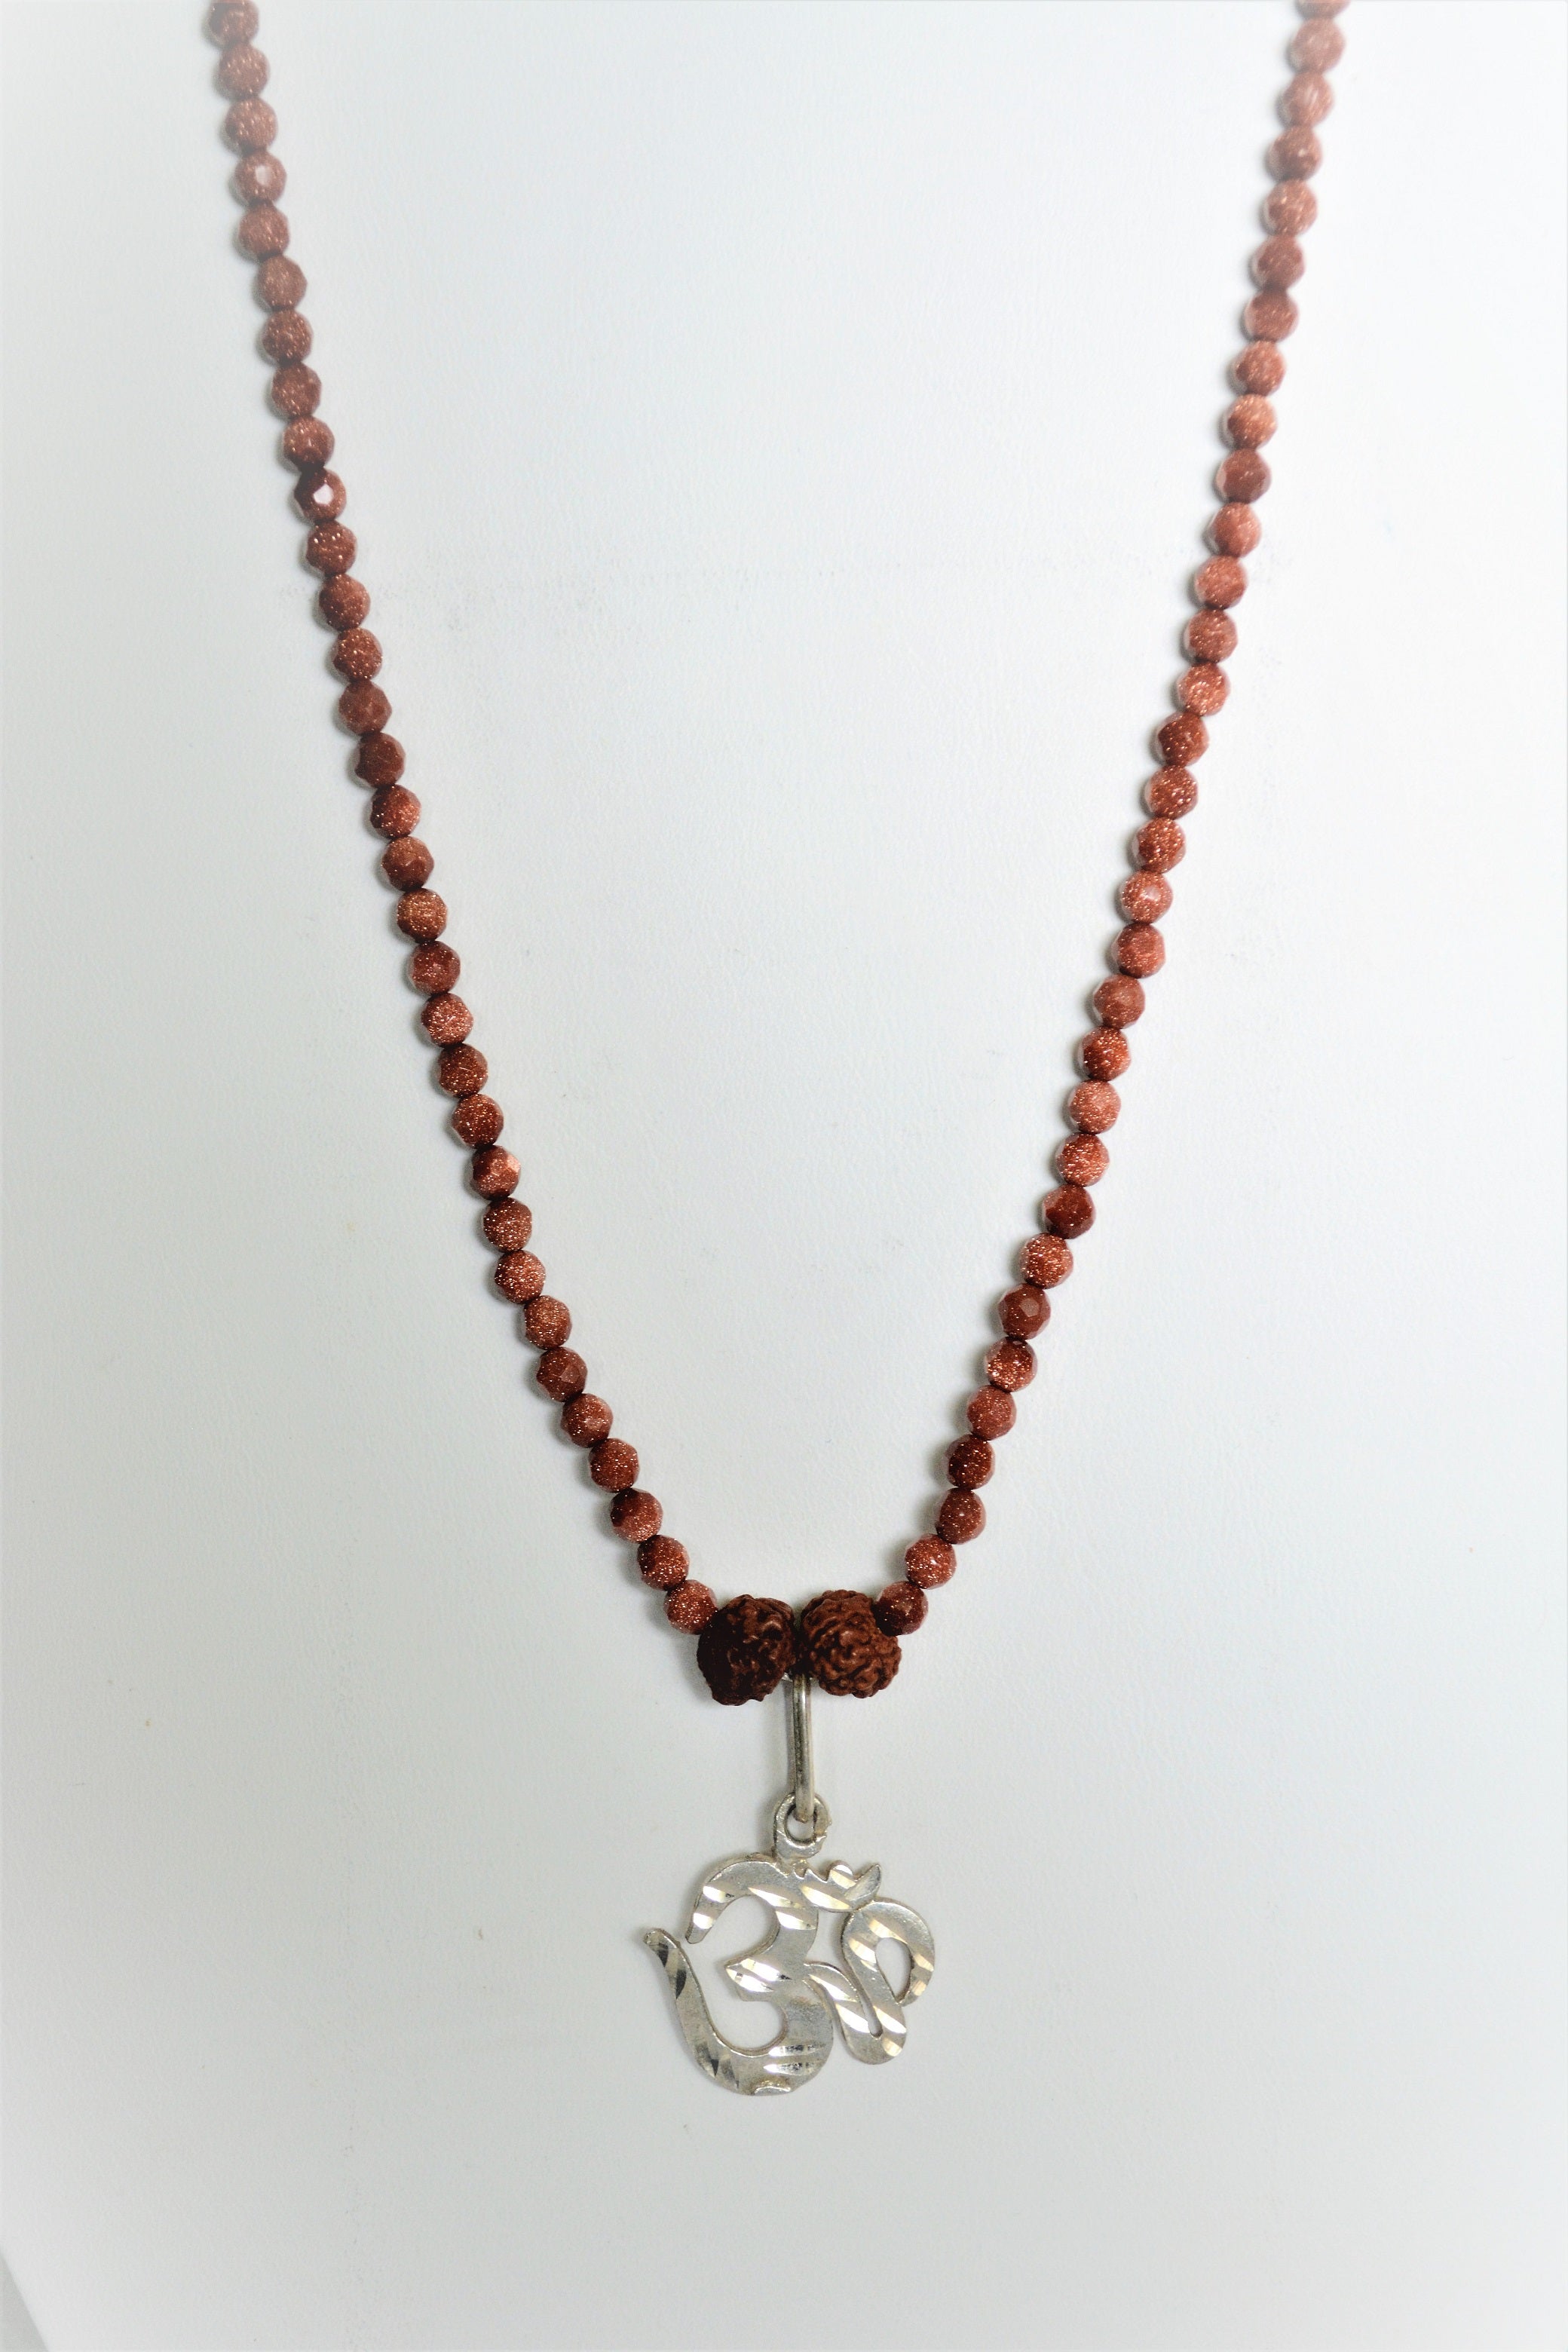 Necklace with silver pendant